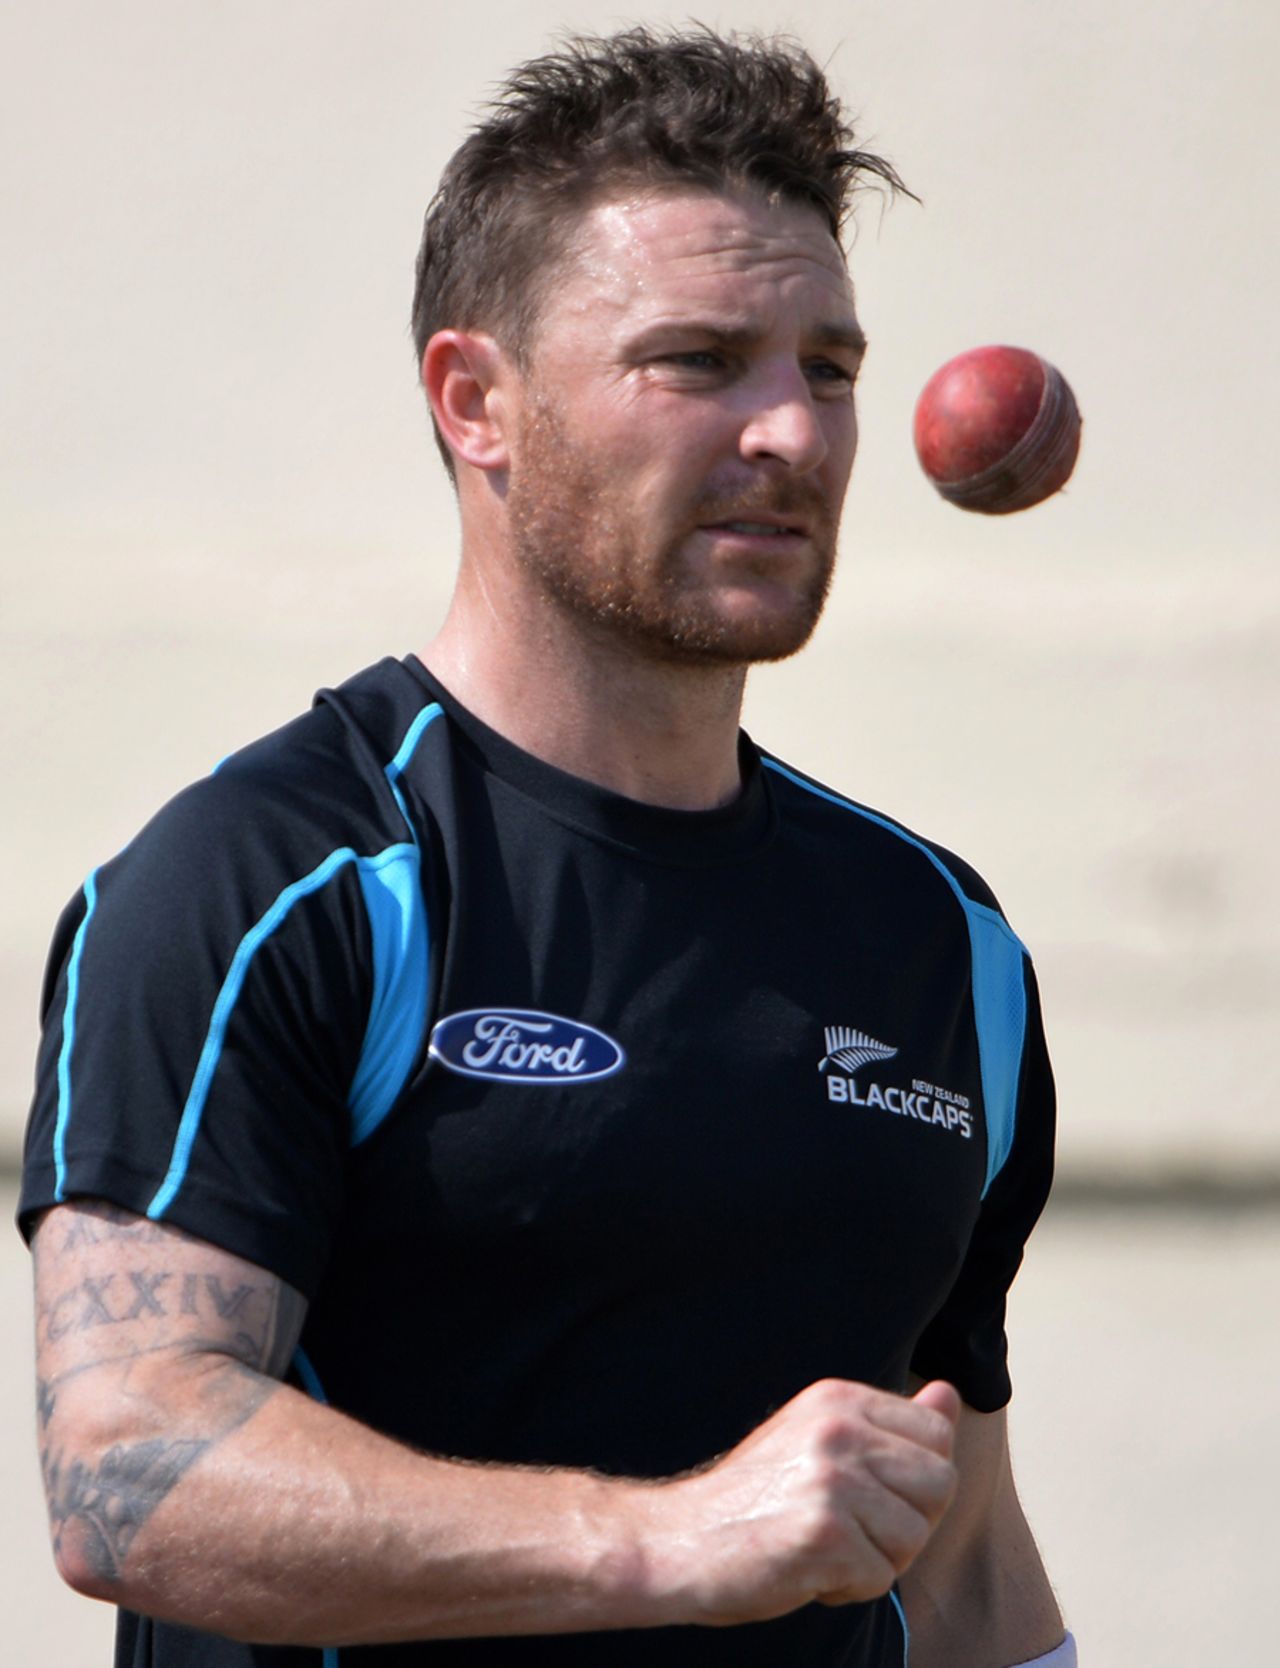 Brendon McCullum gets ready for a bowl in the nets, Pakistan v New Zealand 2014-15, Sharjah, November 24, 2014